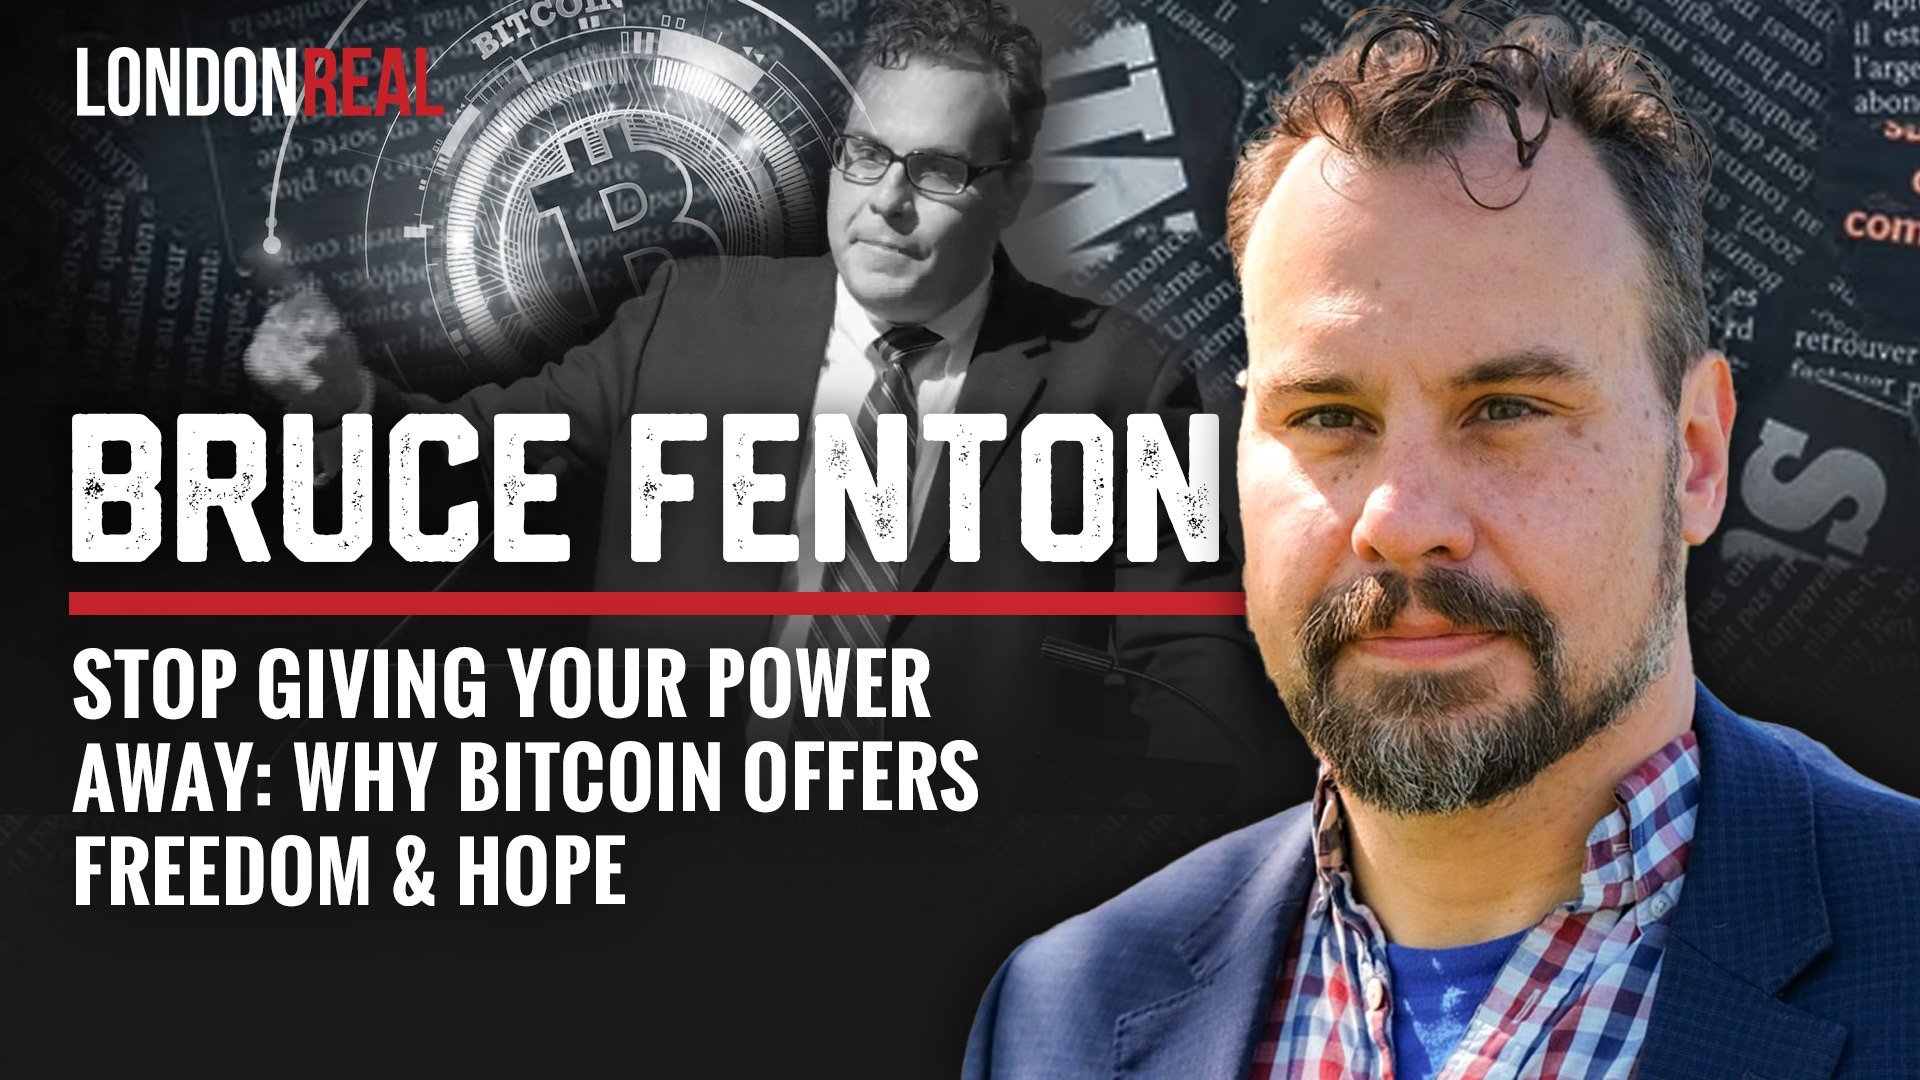 Bruce Fenton - Stop Giving Your Power Away: Why Bitcoin Offers Freedom & Hope